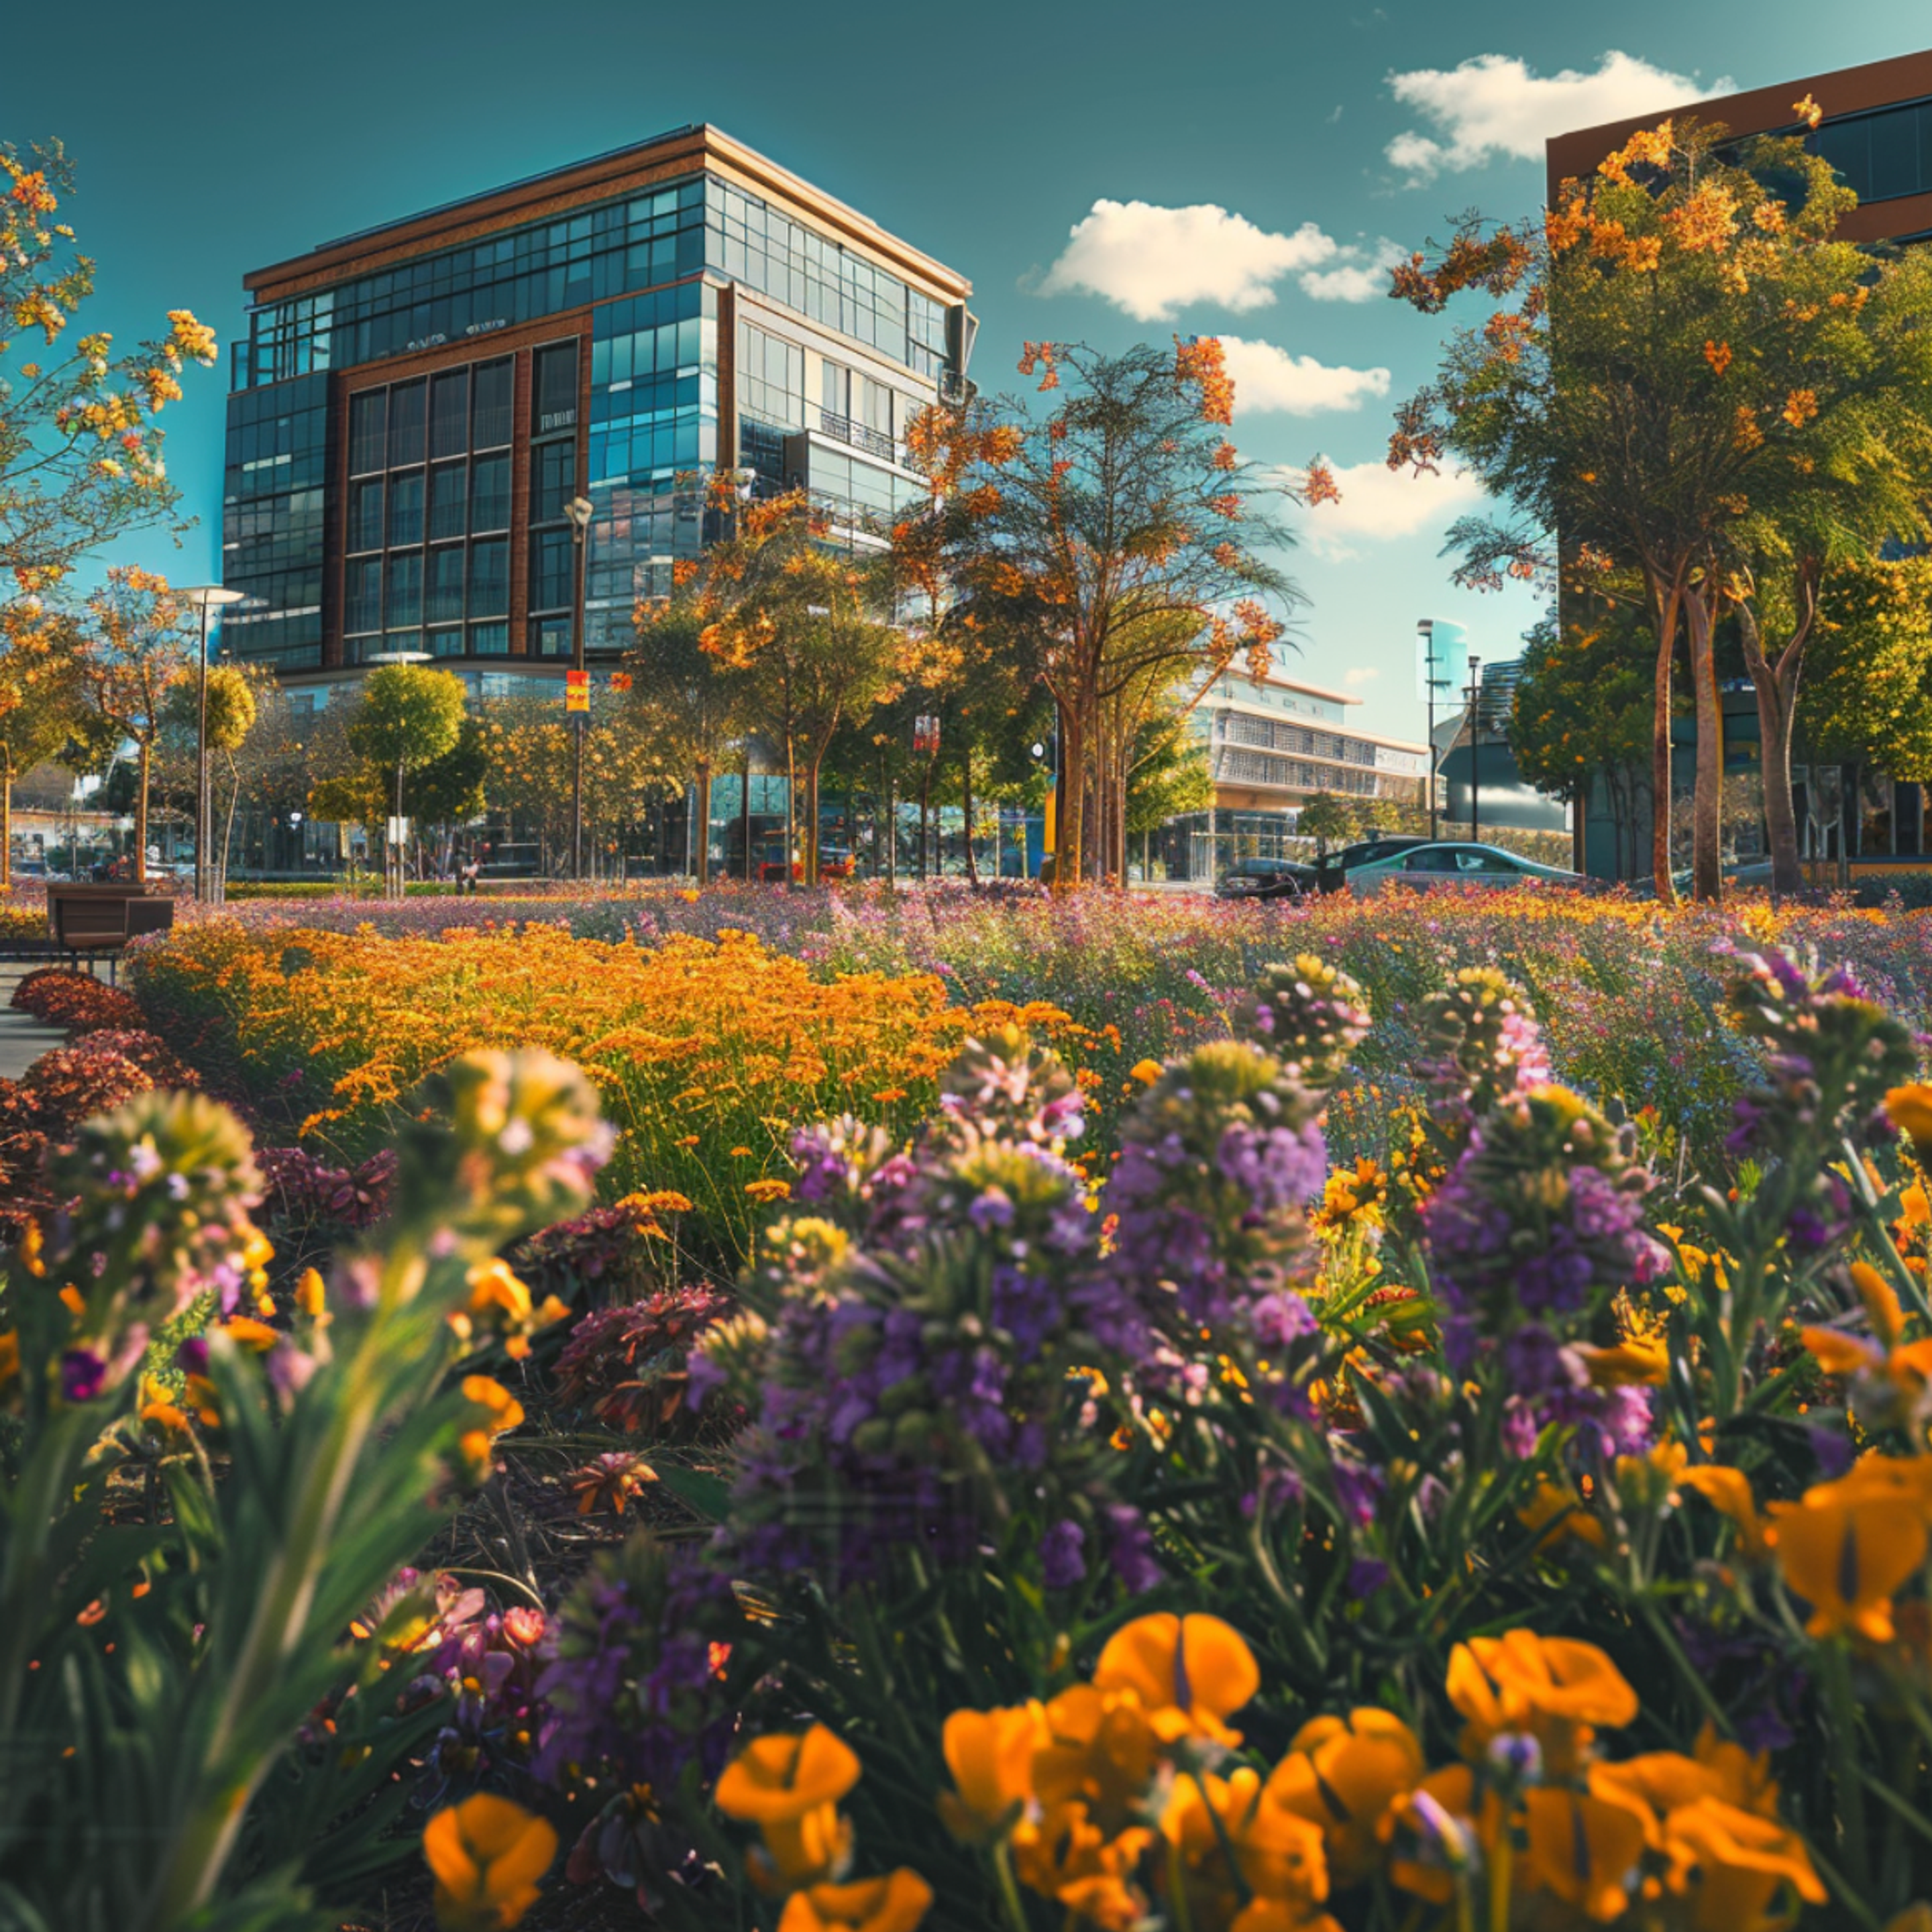 Lush, vibrant flower beds in full bloom at a park in San Jose, California, with a modern glass-fronted building in the background and clear blue skies overhead, highlighting the city's commitment to integrating natural beauty within its urban environment.